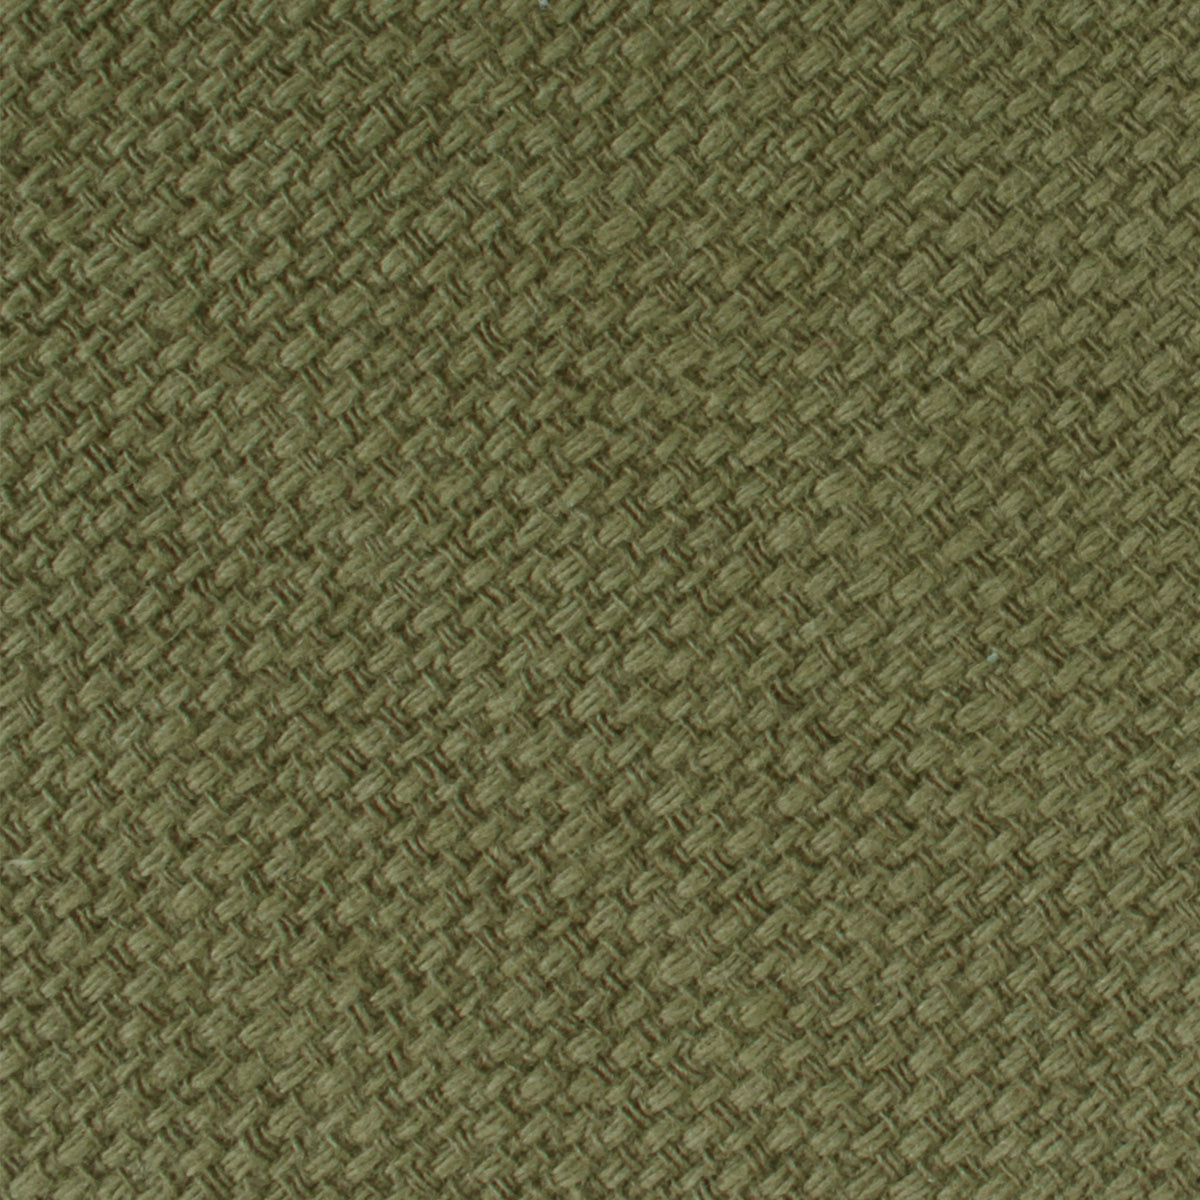 Olive Green Basket Weave Linen Fabric Swatch